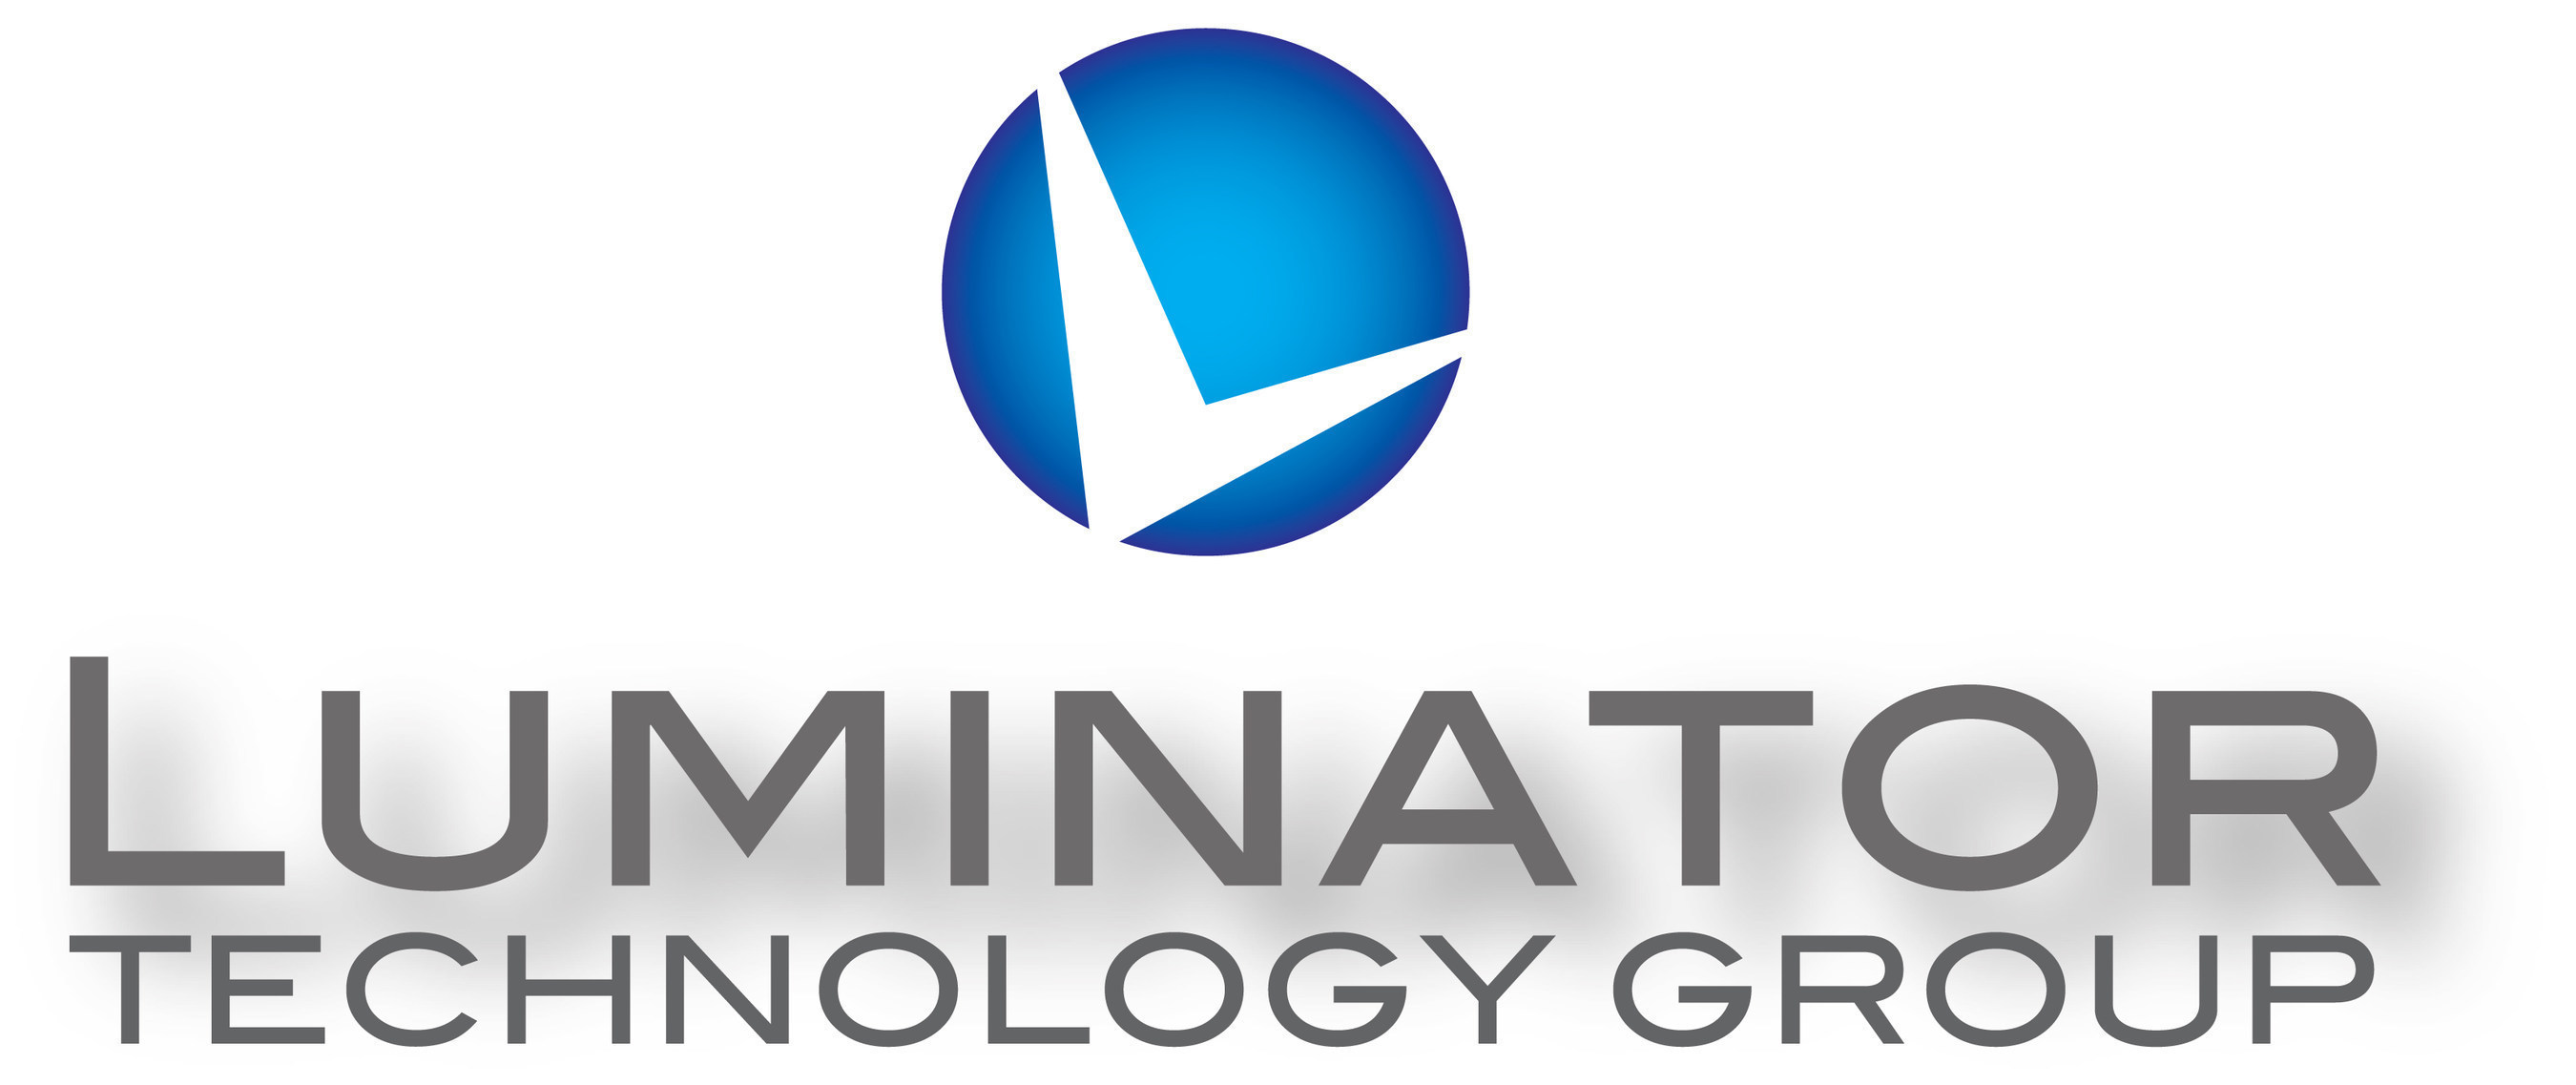 Luminator Technology Group Acquires BMG MIS